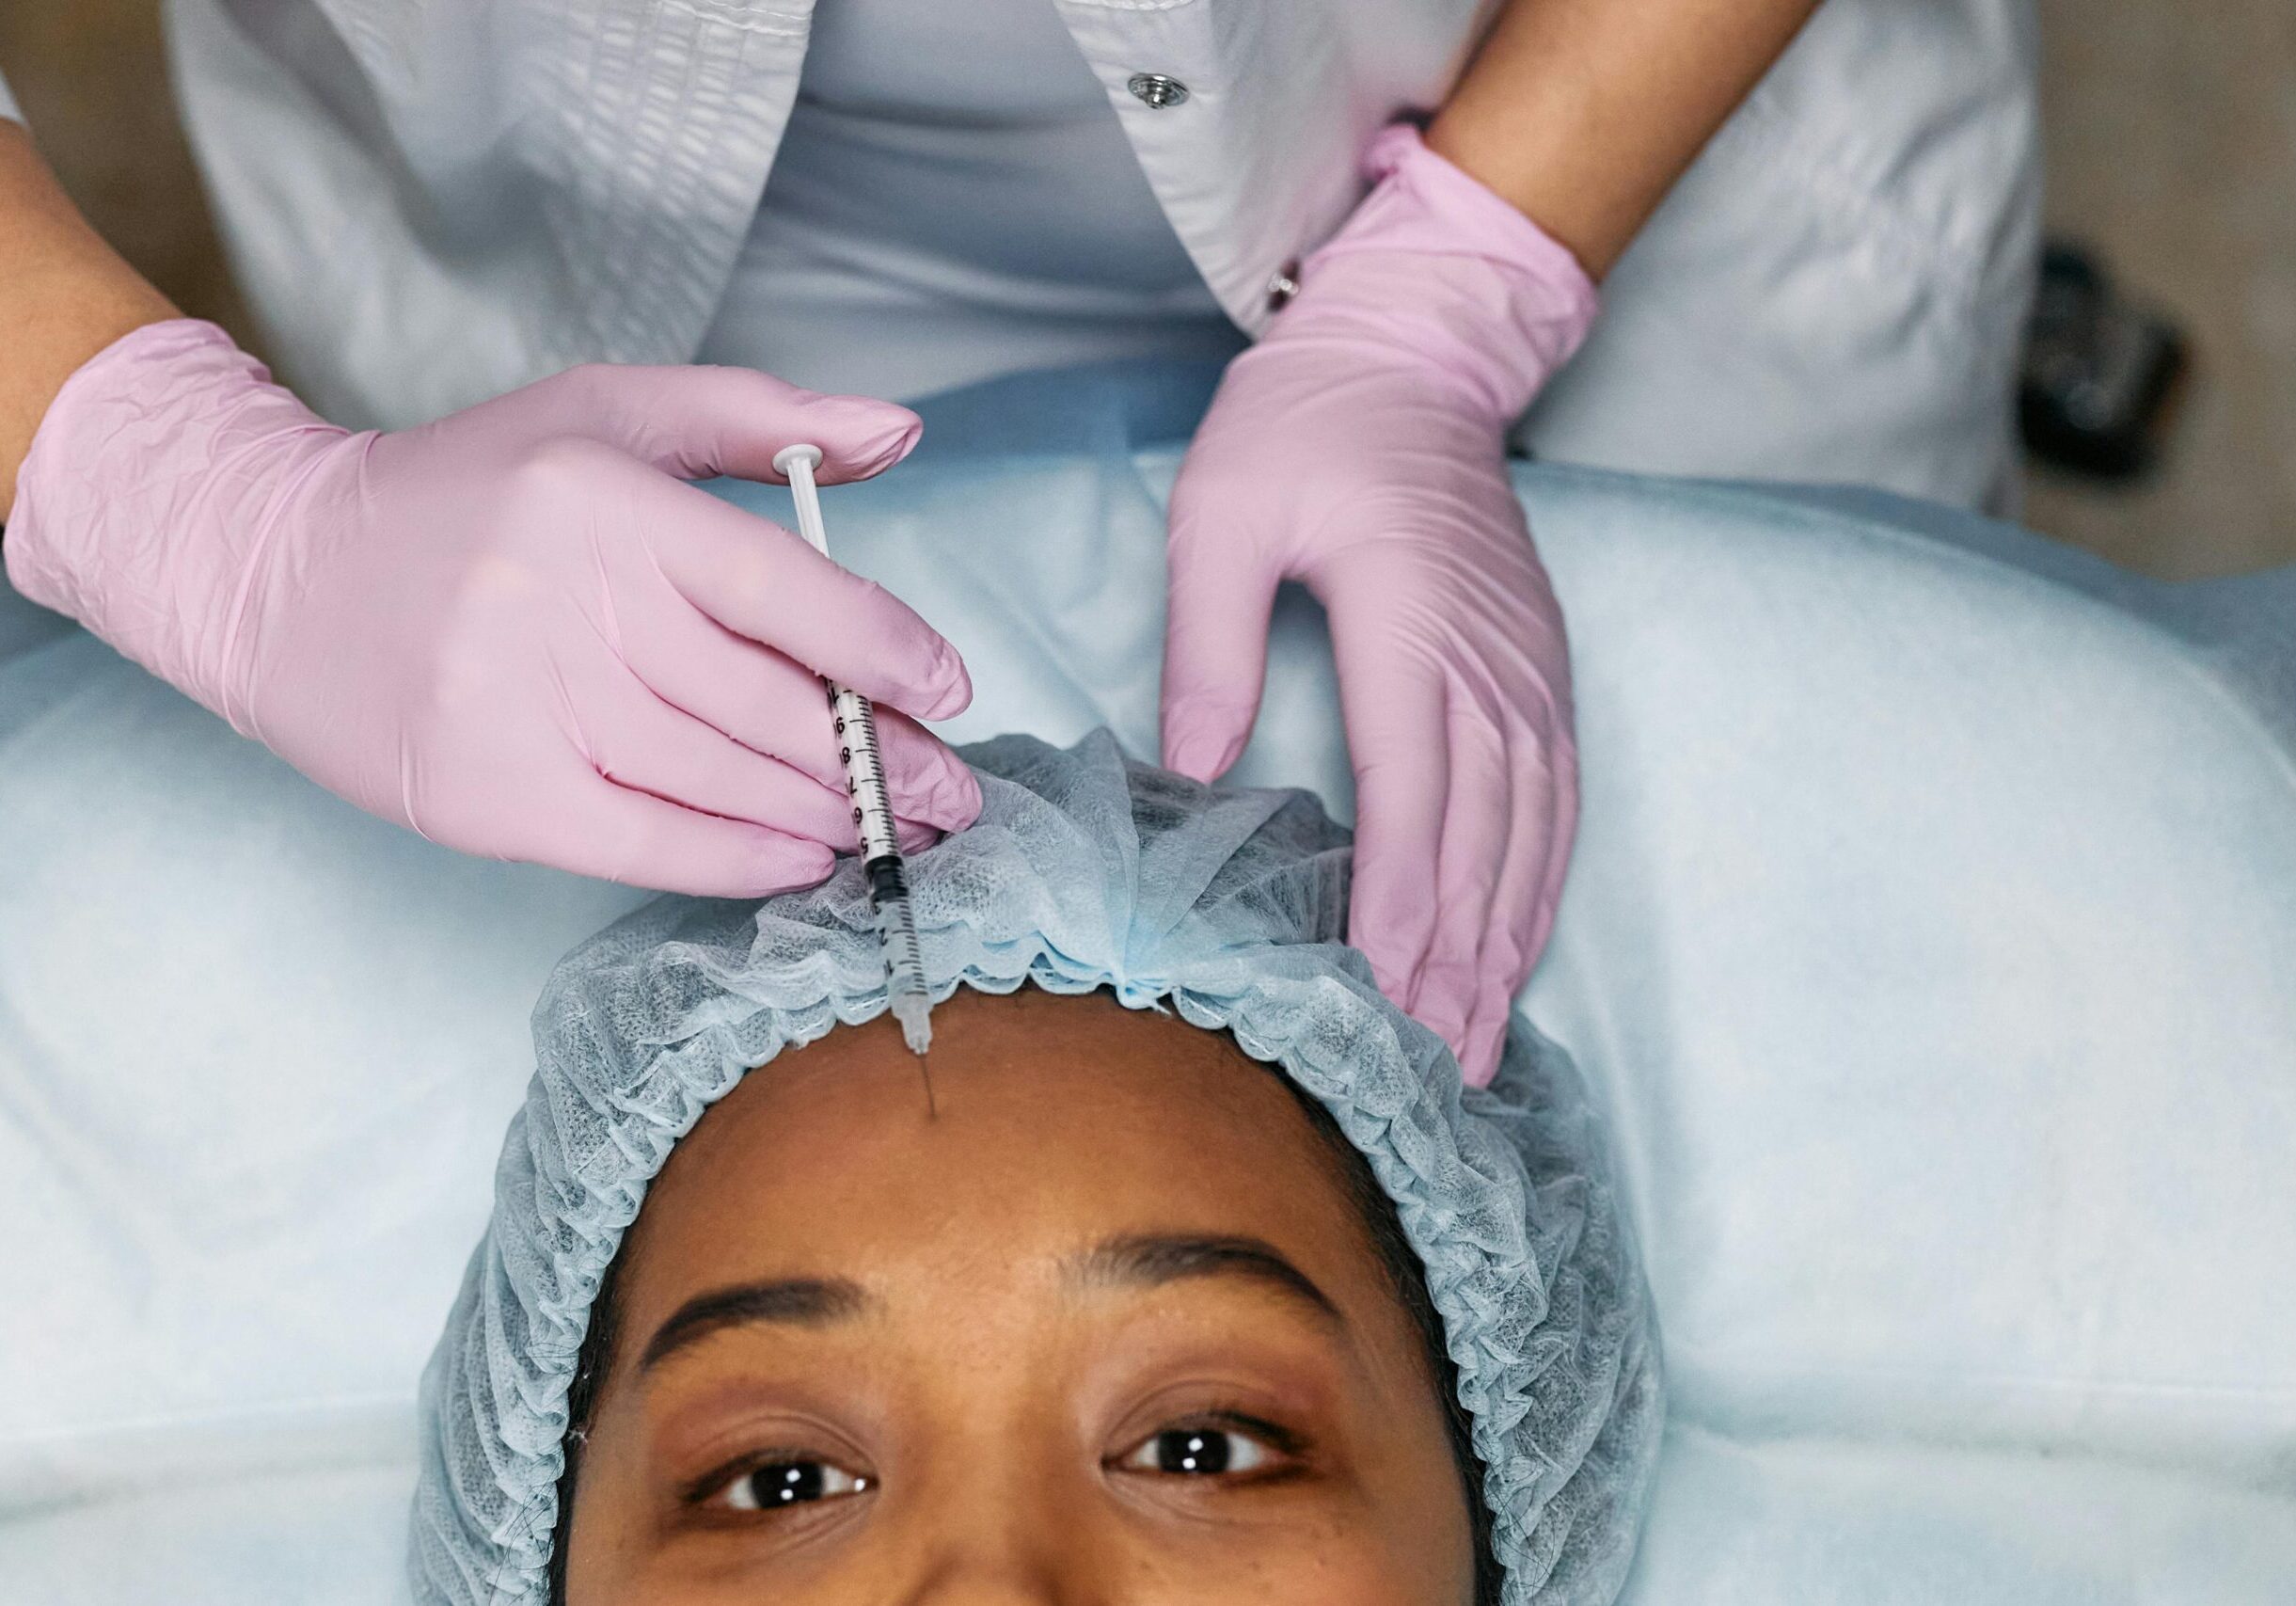 Image of a woman receiving Botox injections.